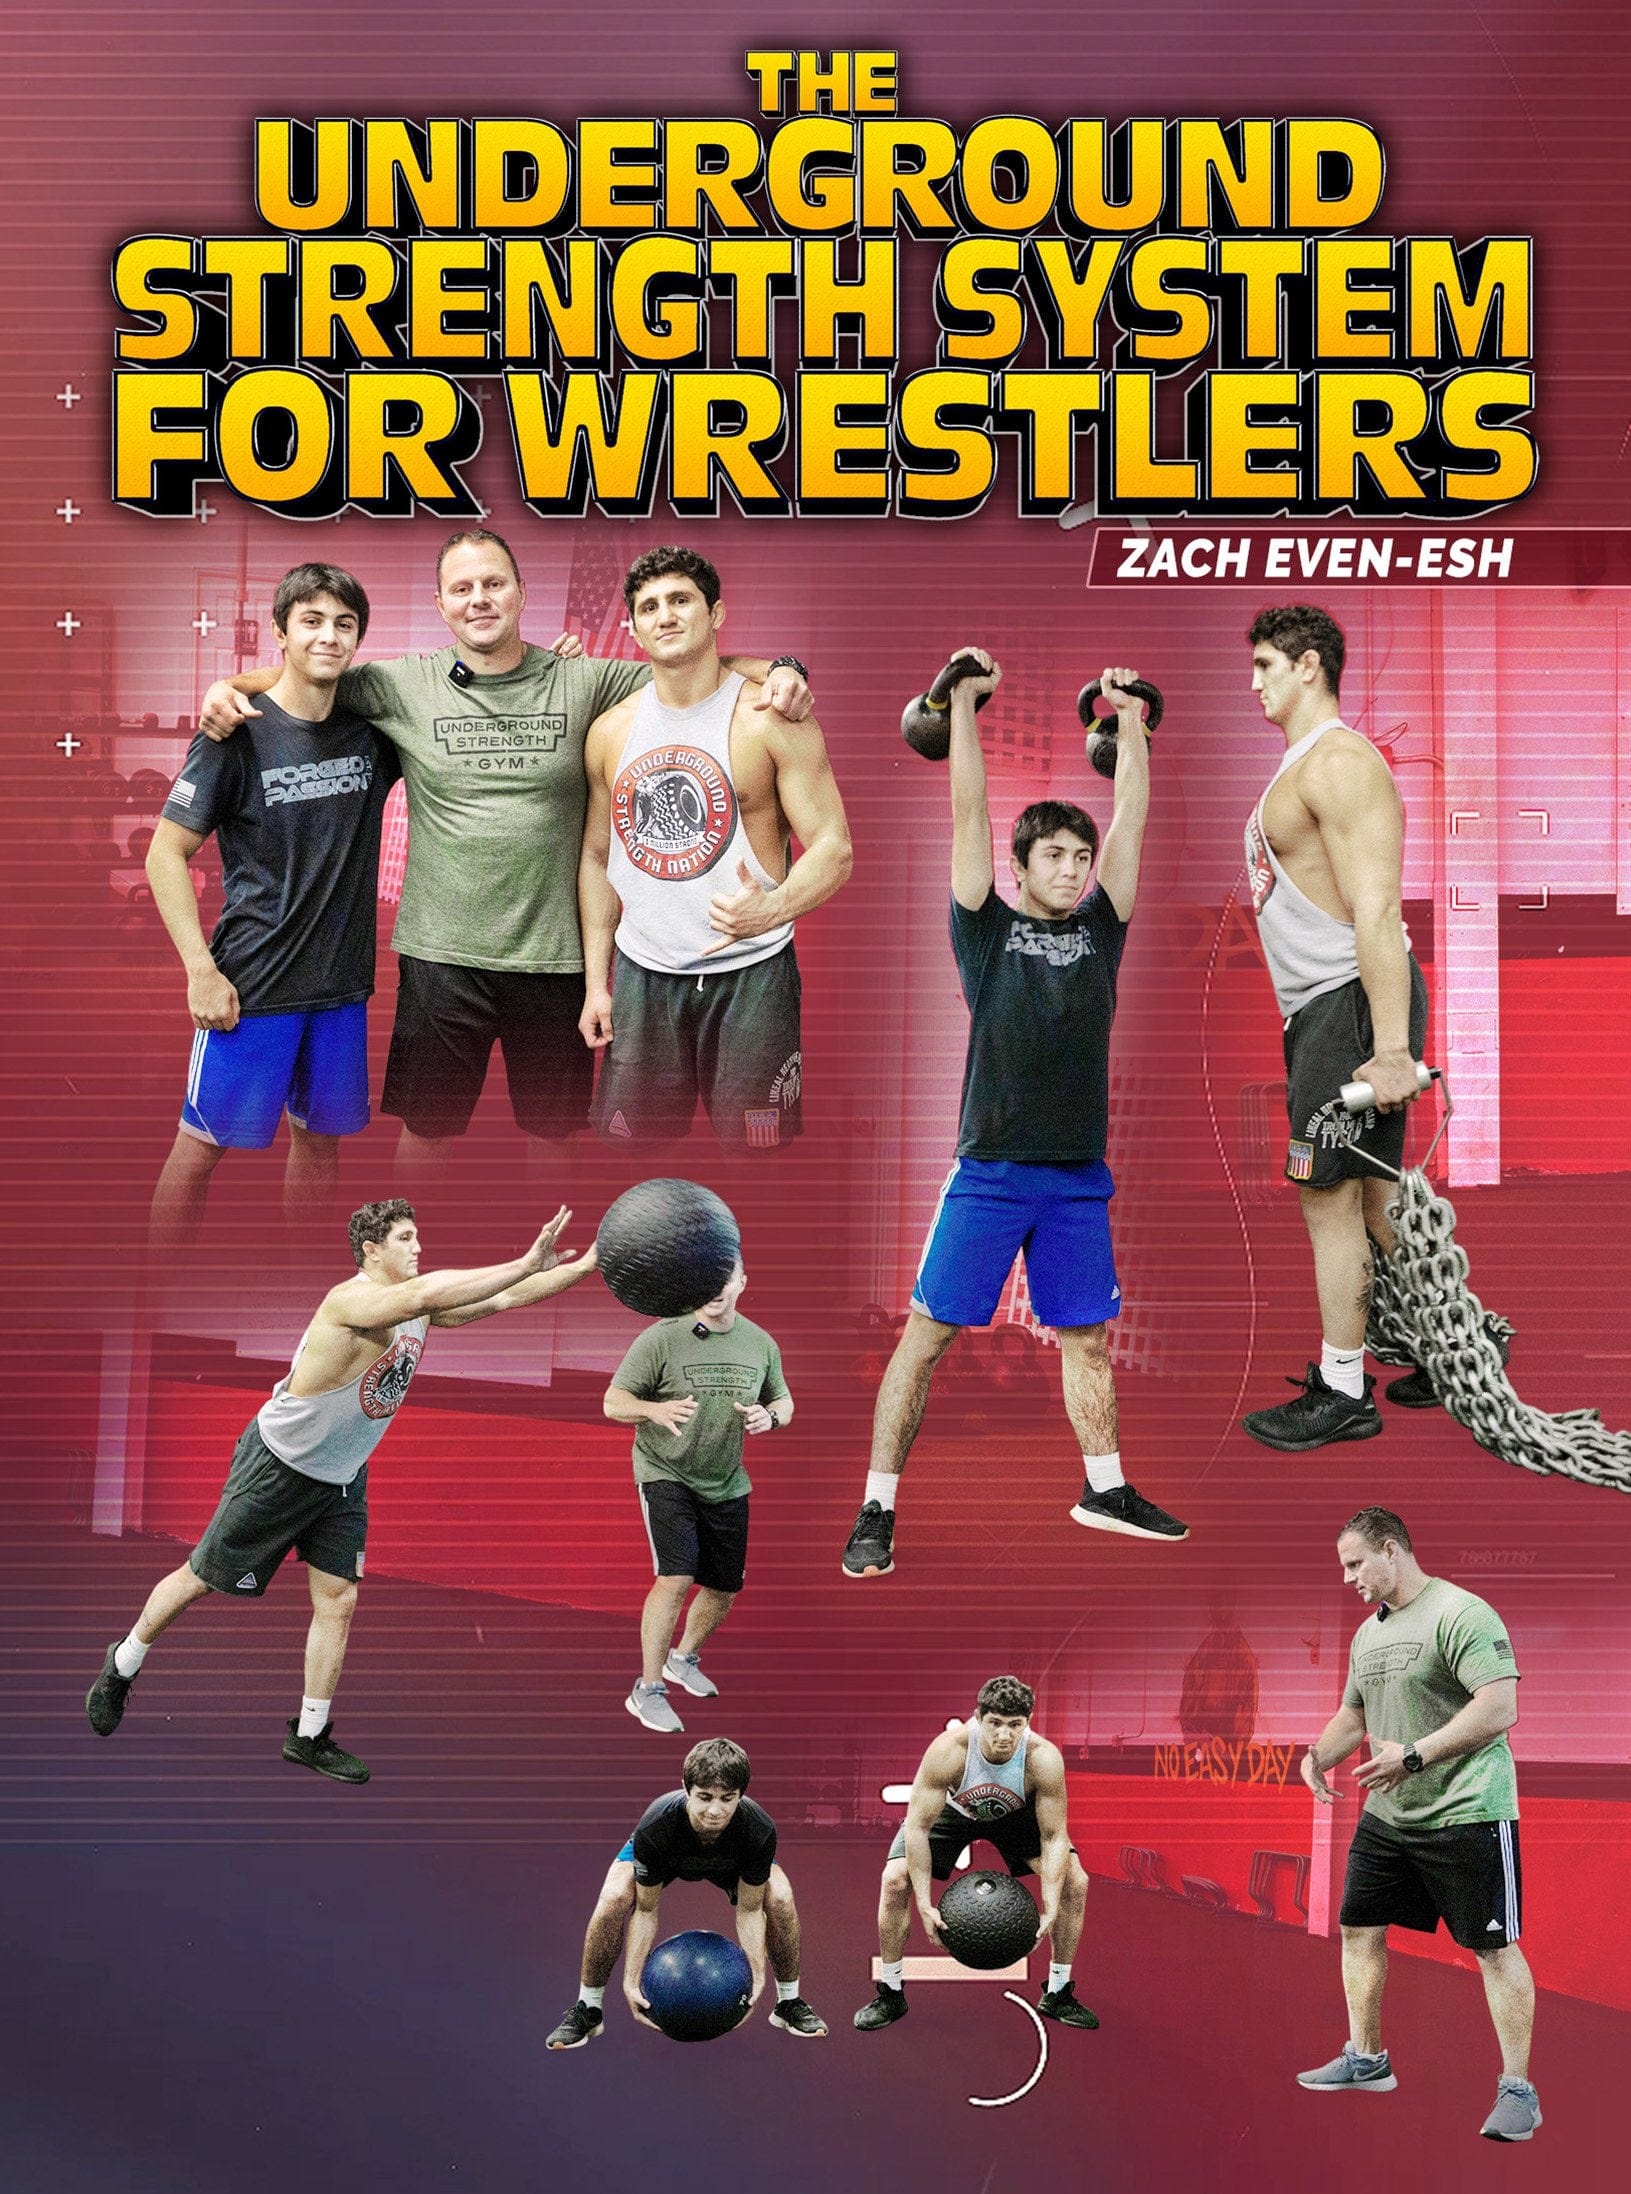 The Underground Strength System For Wrestling by Zach Even-esh - Fanatic Wrestling